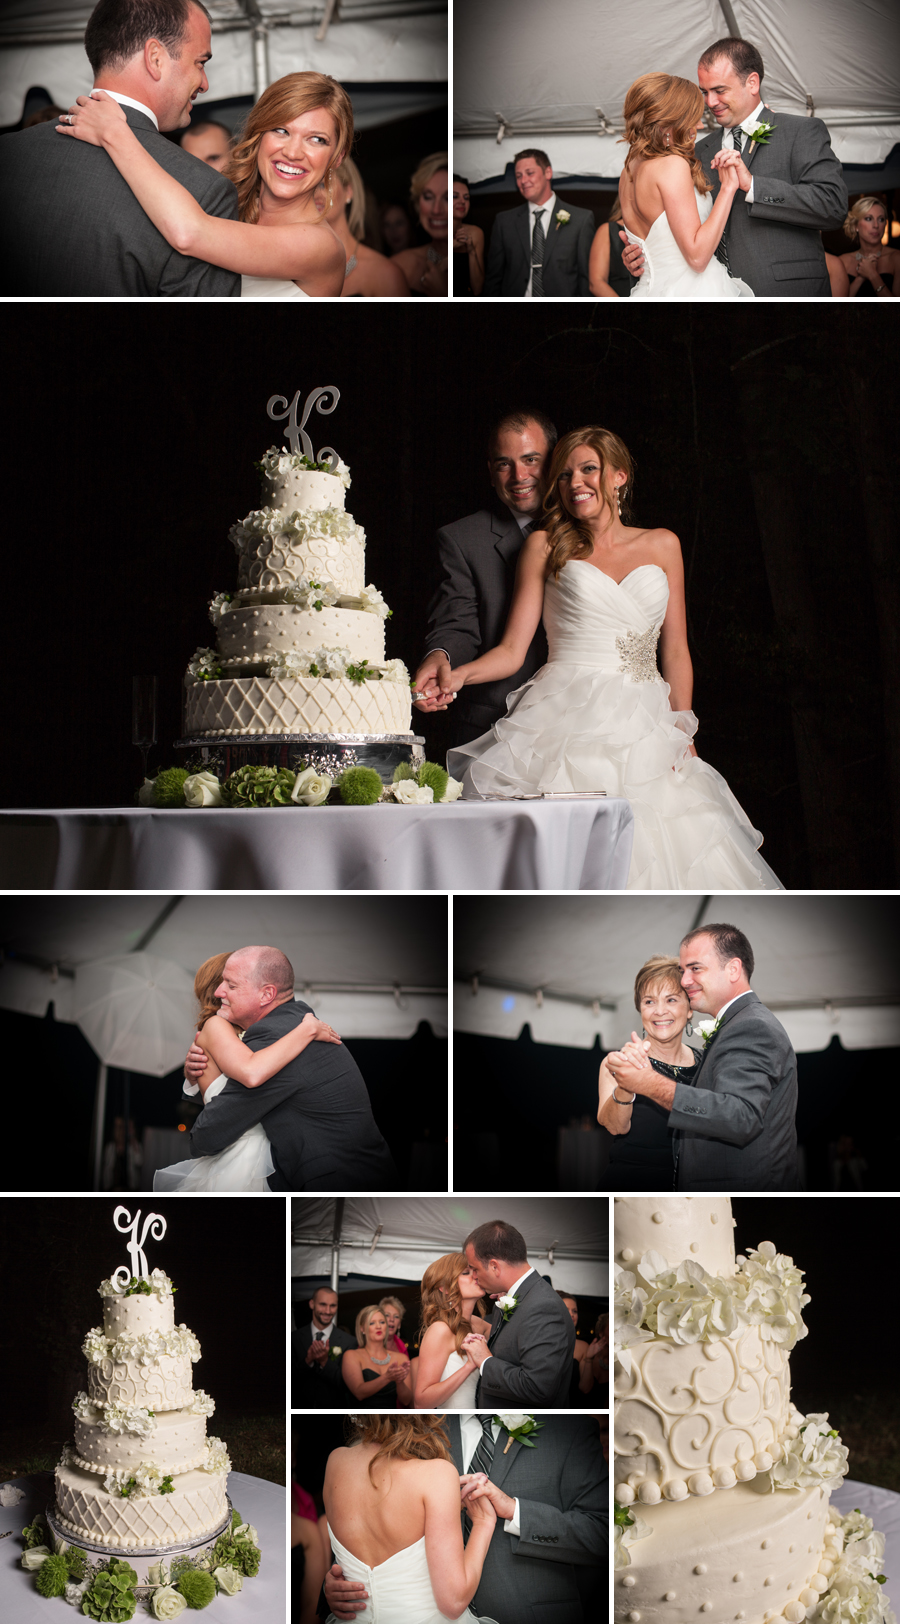 Tent reception in sevierville, deborah taylor wedding cake, first dance as husband and wife, bledsoe photography